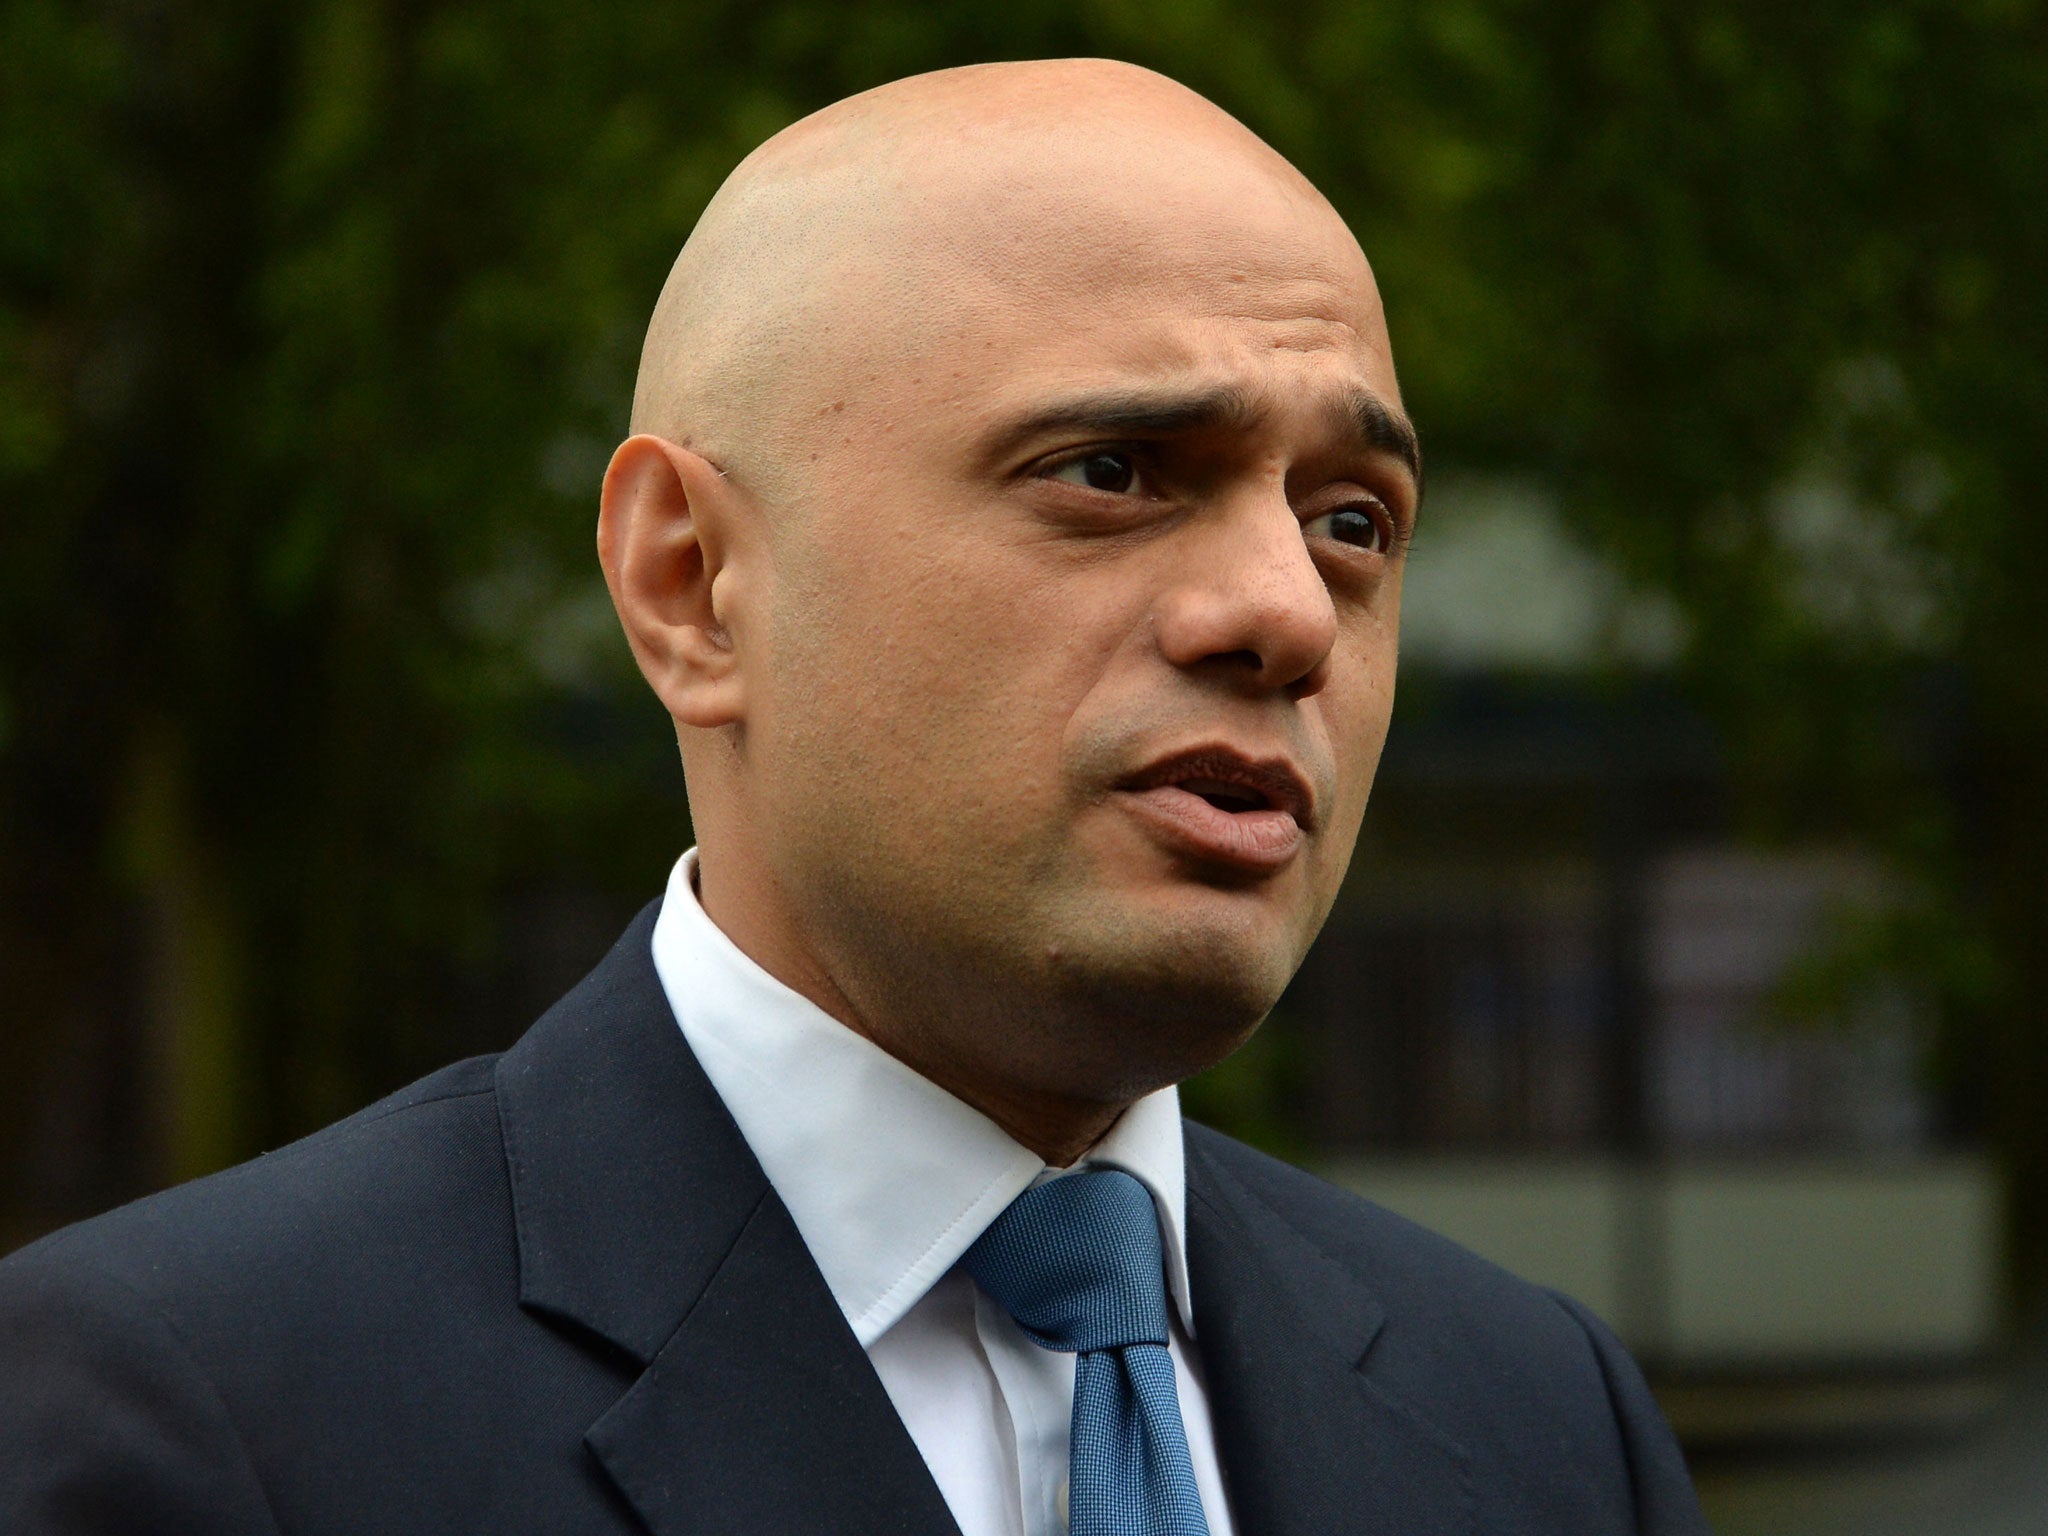 Mr Javid said the Government was 'determined to get a good deal for Britain'